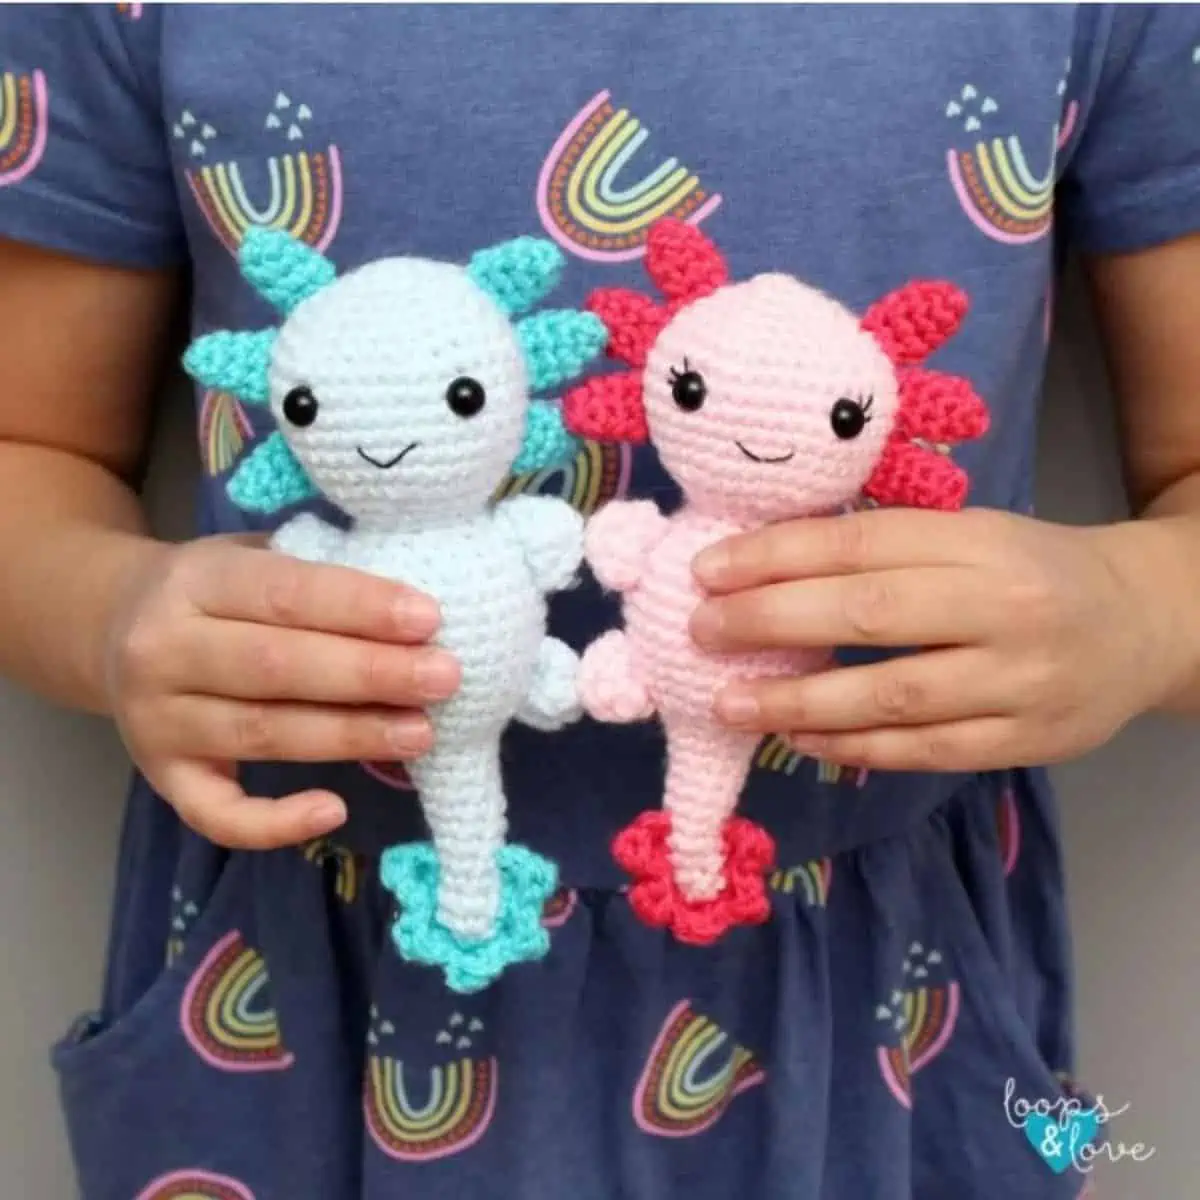 two axolotl crochet toys being held